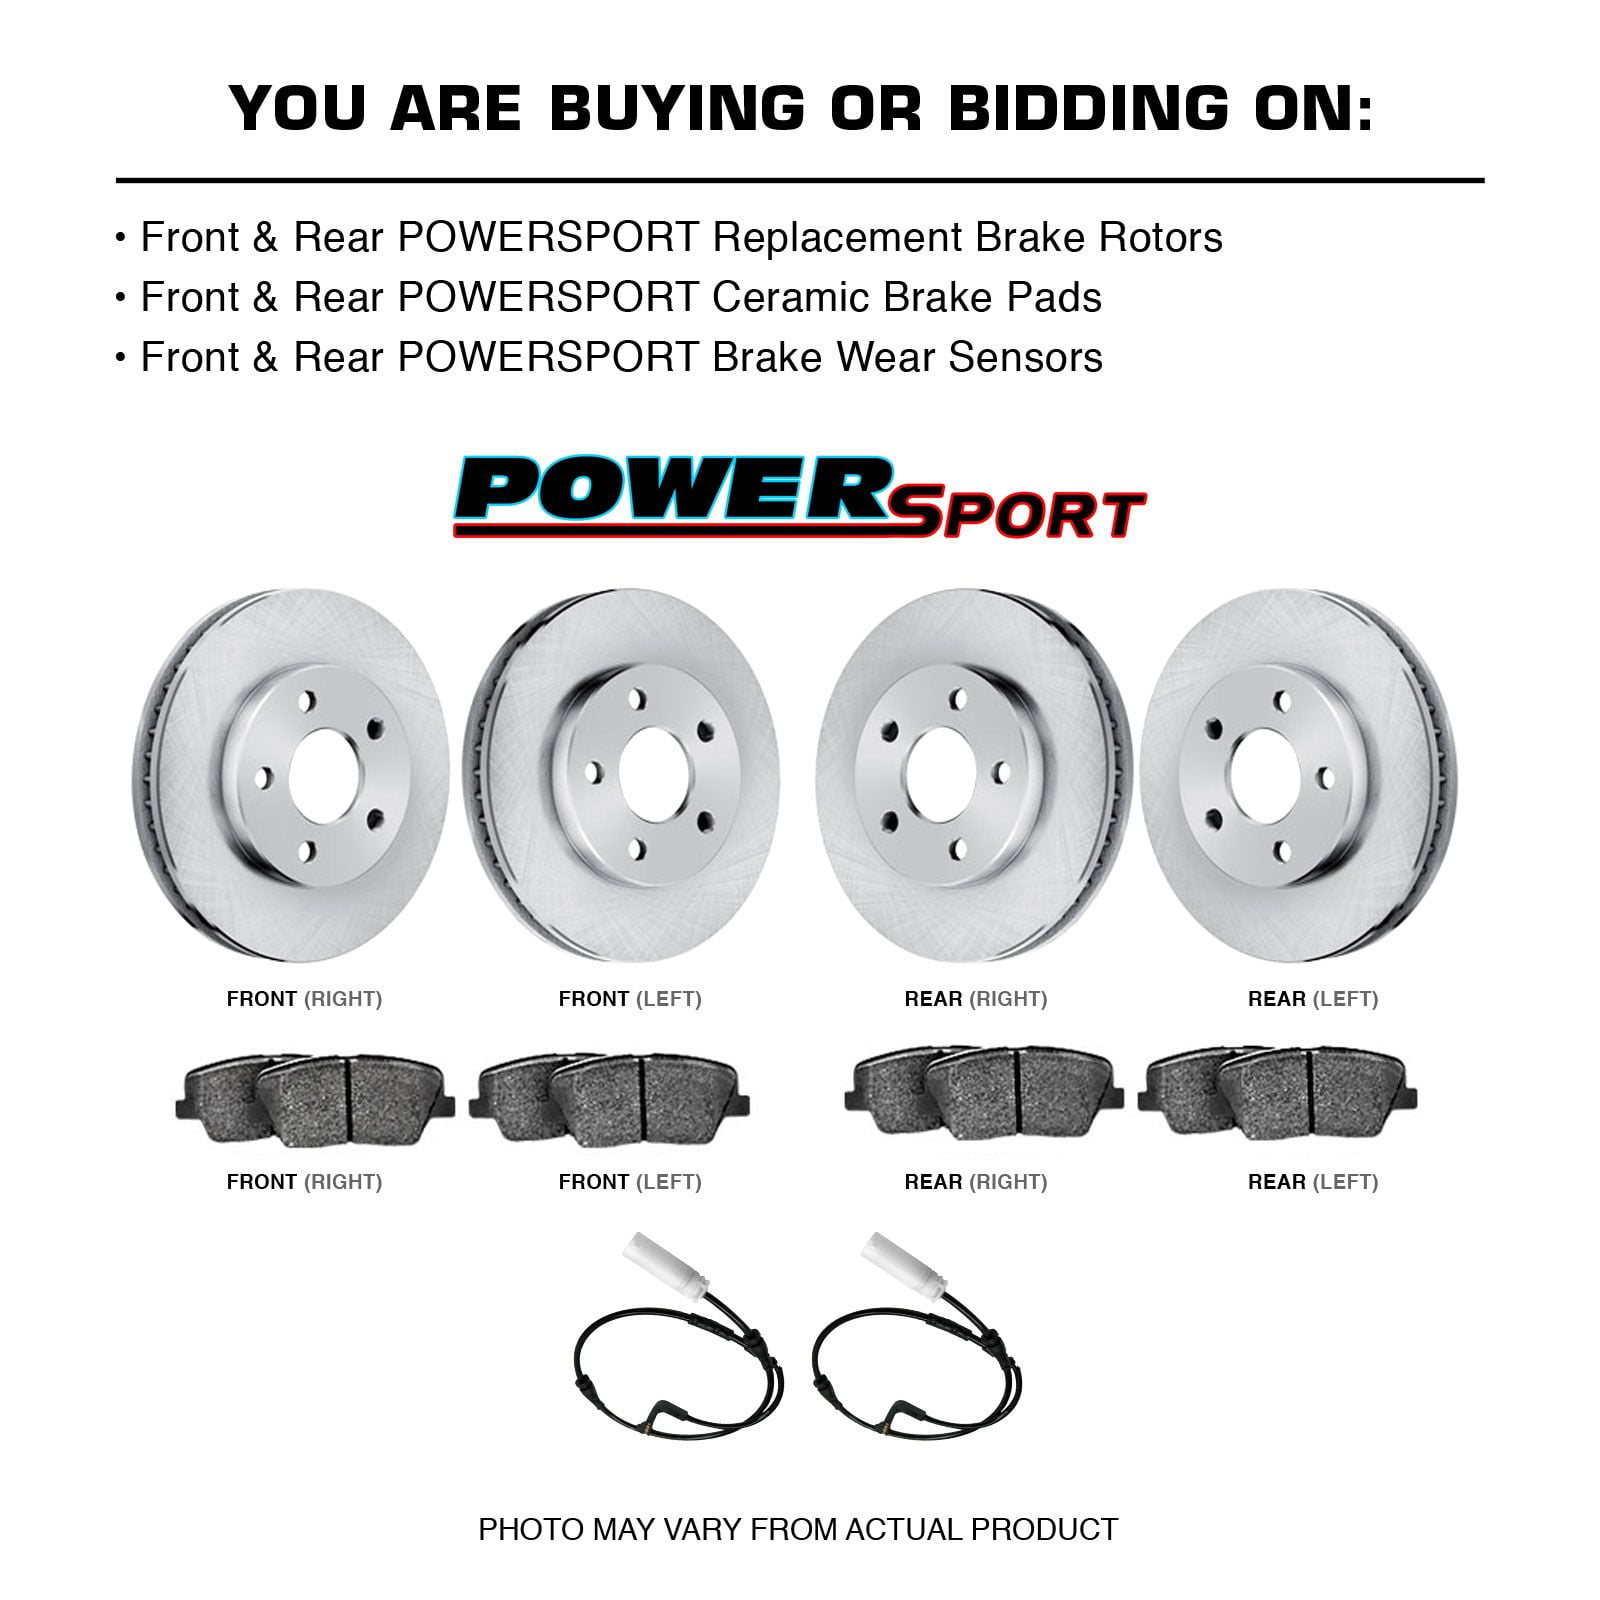 PowerSport Front Rear Brakes and Rotors Kit |Front Rear Brake Pads| Brake  Rotors and Pads| Ceramic Brake Pads and Rotors |fits 2007-2010 Mini Cooper 